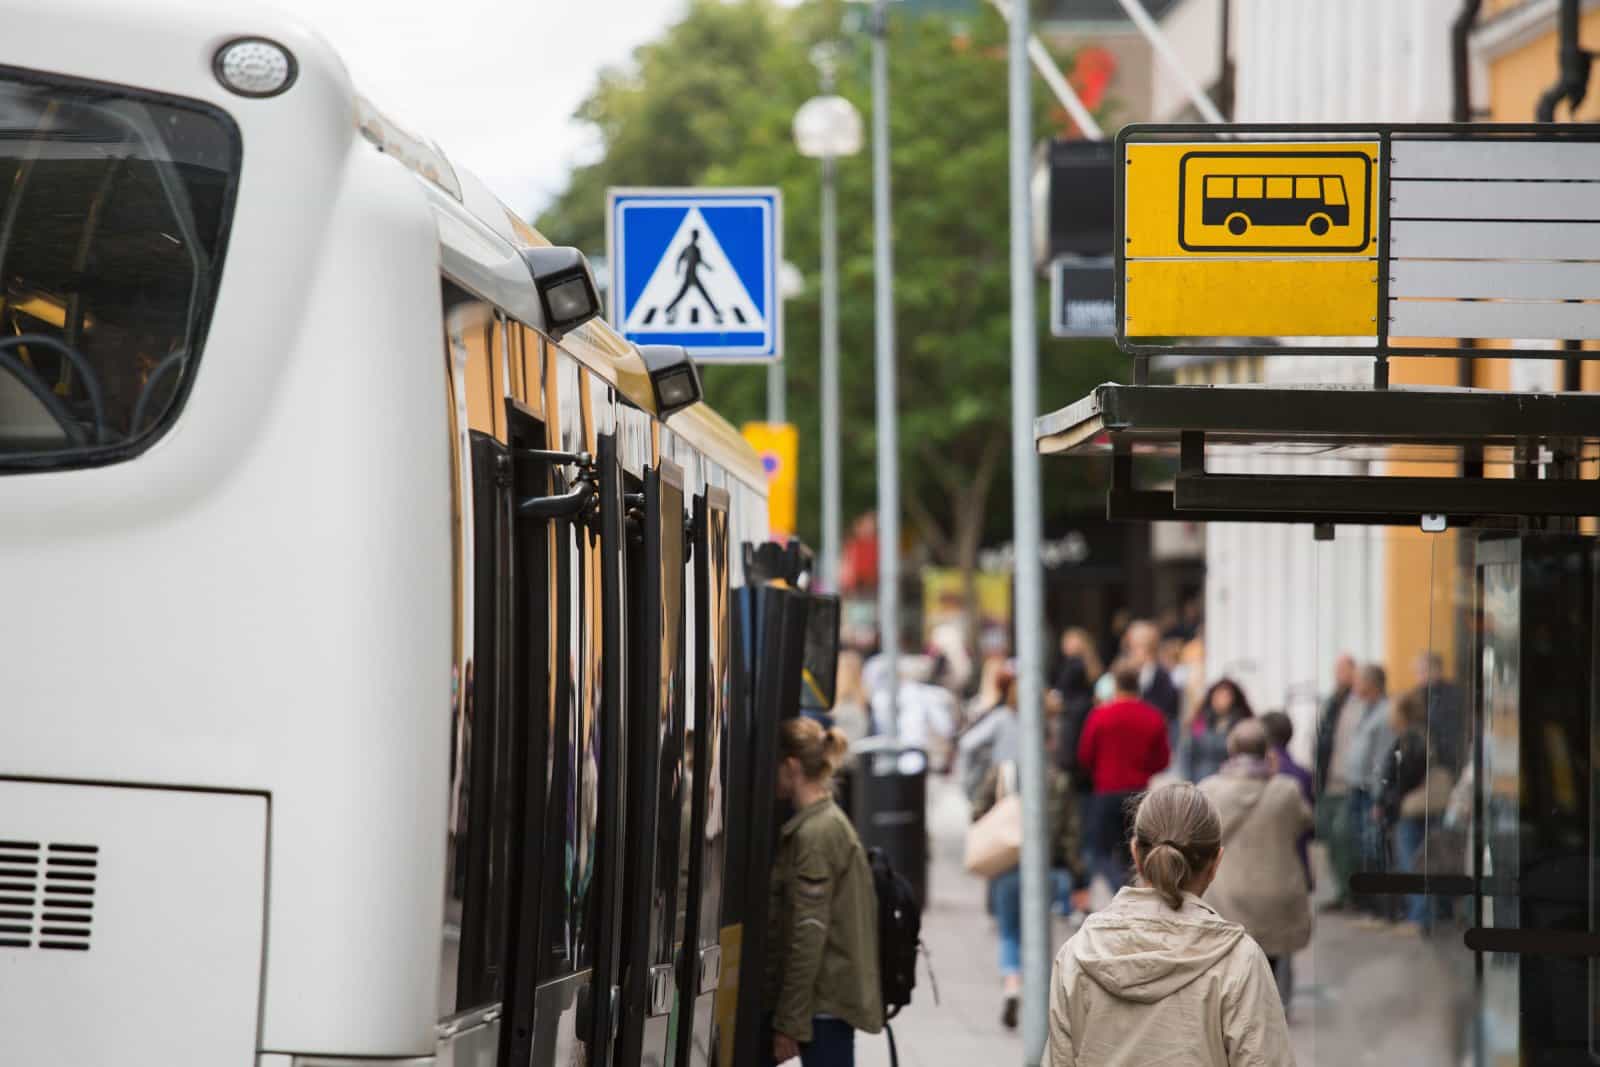 <p><span>Opting for public transportation over taxis or car rentals can lead to substantial savings. European cities generally boast efficient and affordable public transport systems. Look into day or multi-day passes for unlimited travel, which are often more economical than single tickets.</span></p> <p><b>Insider’s Tip: </b><span>Always validate your ticket to avoid fines, as many European cities have an honor-based system.</span></p>